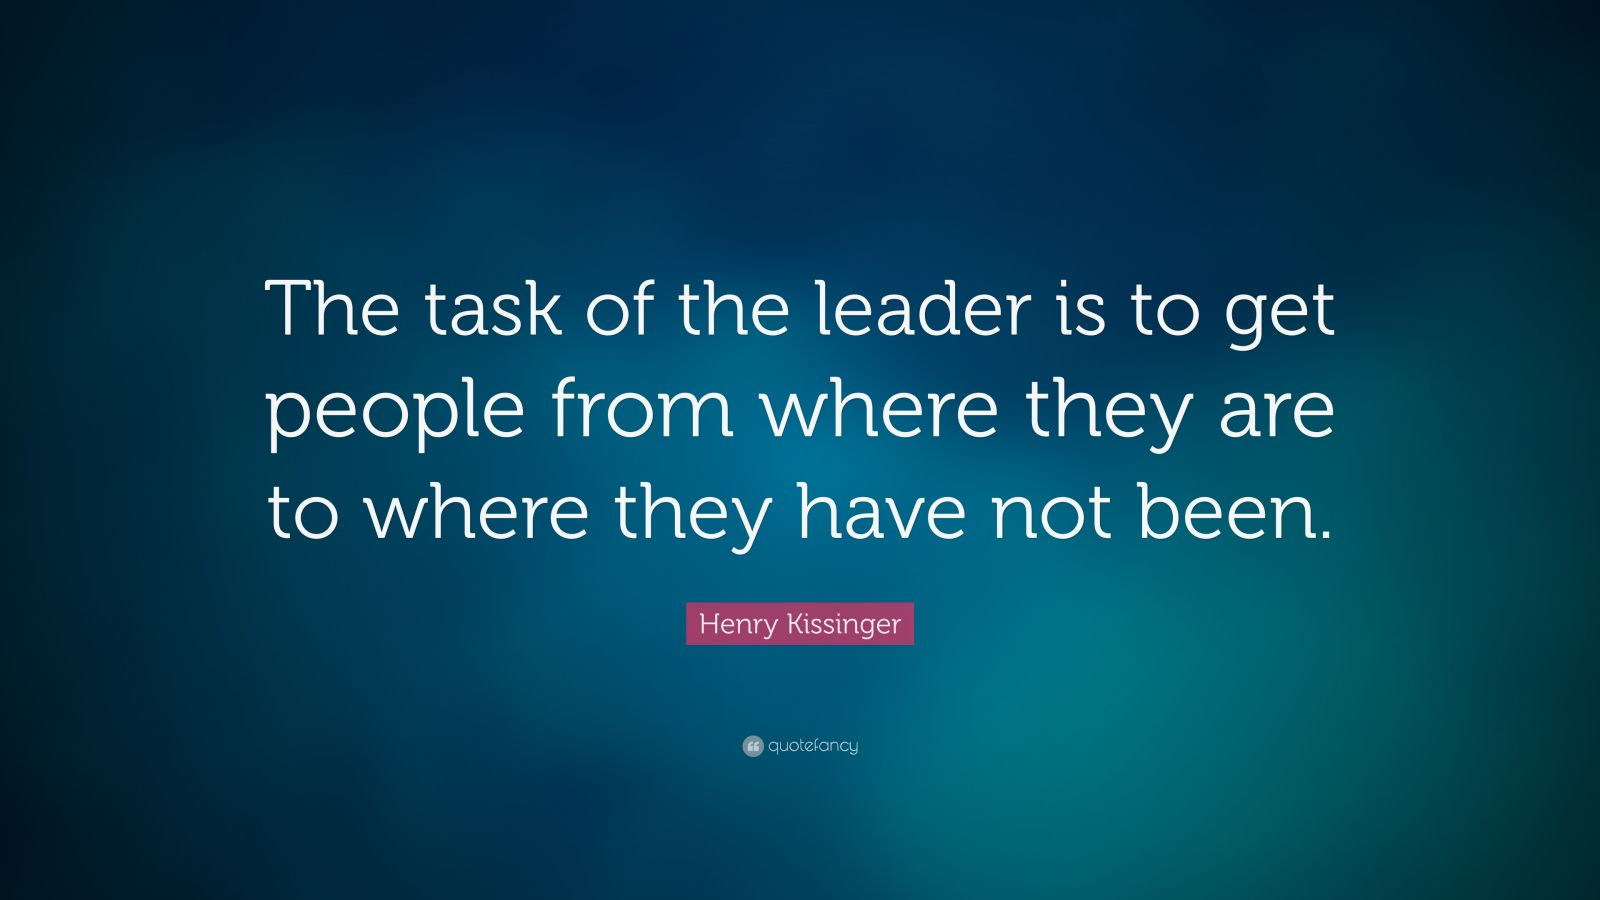 Leadership Quotes Images
 Leadership Quotes 25 wallpapers Quotefancy